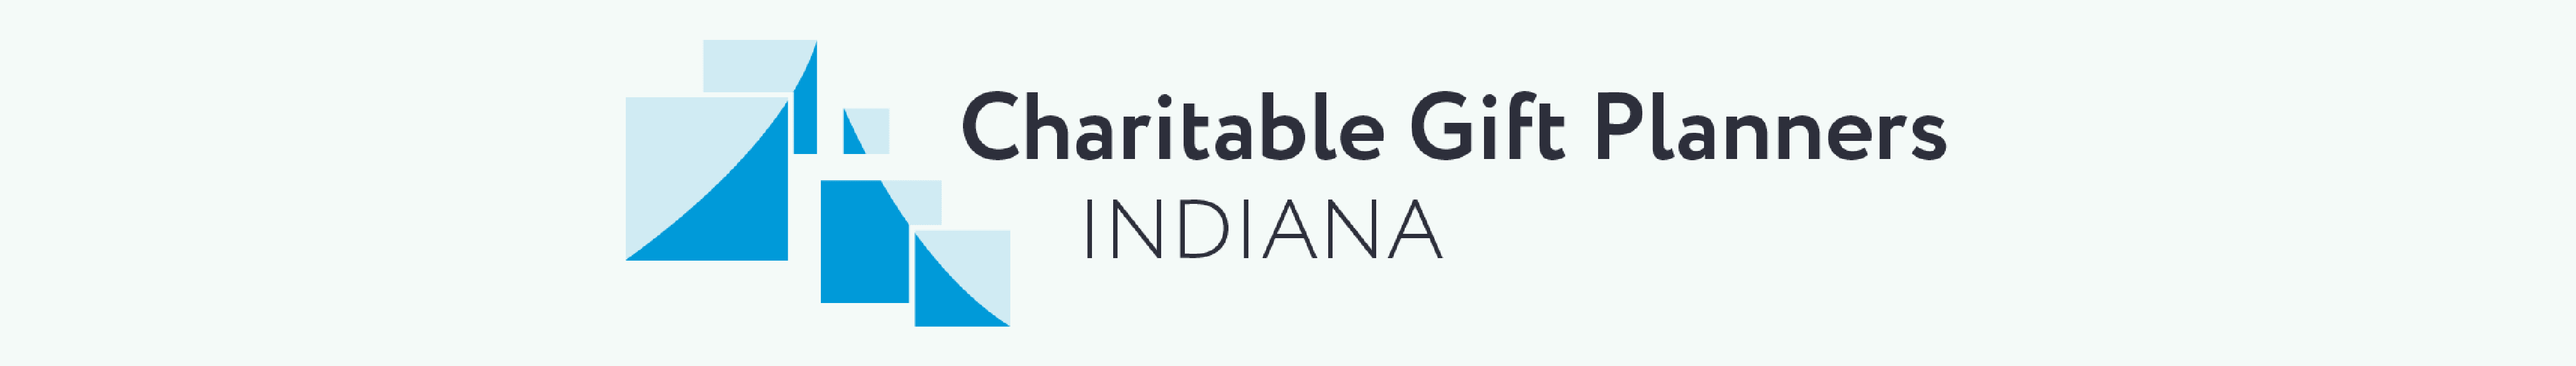 Charitable Gift Planners Indiana Logo